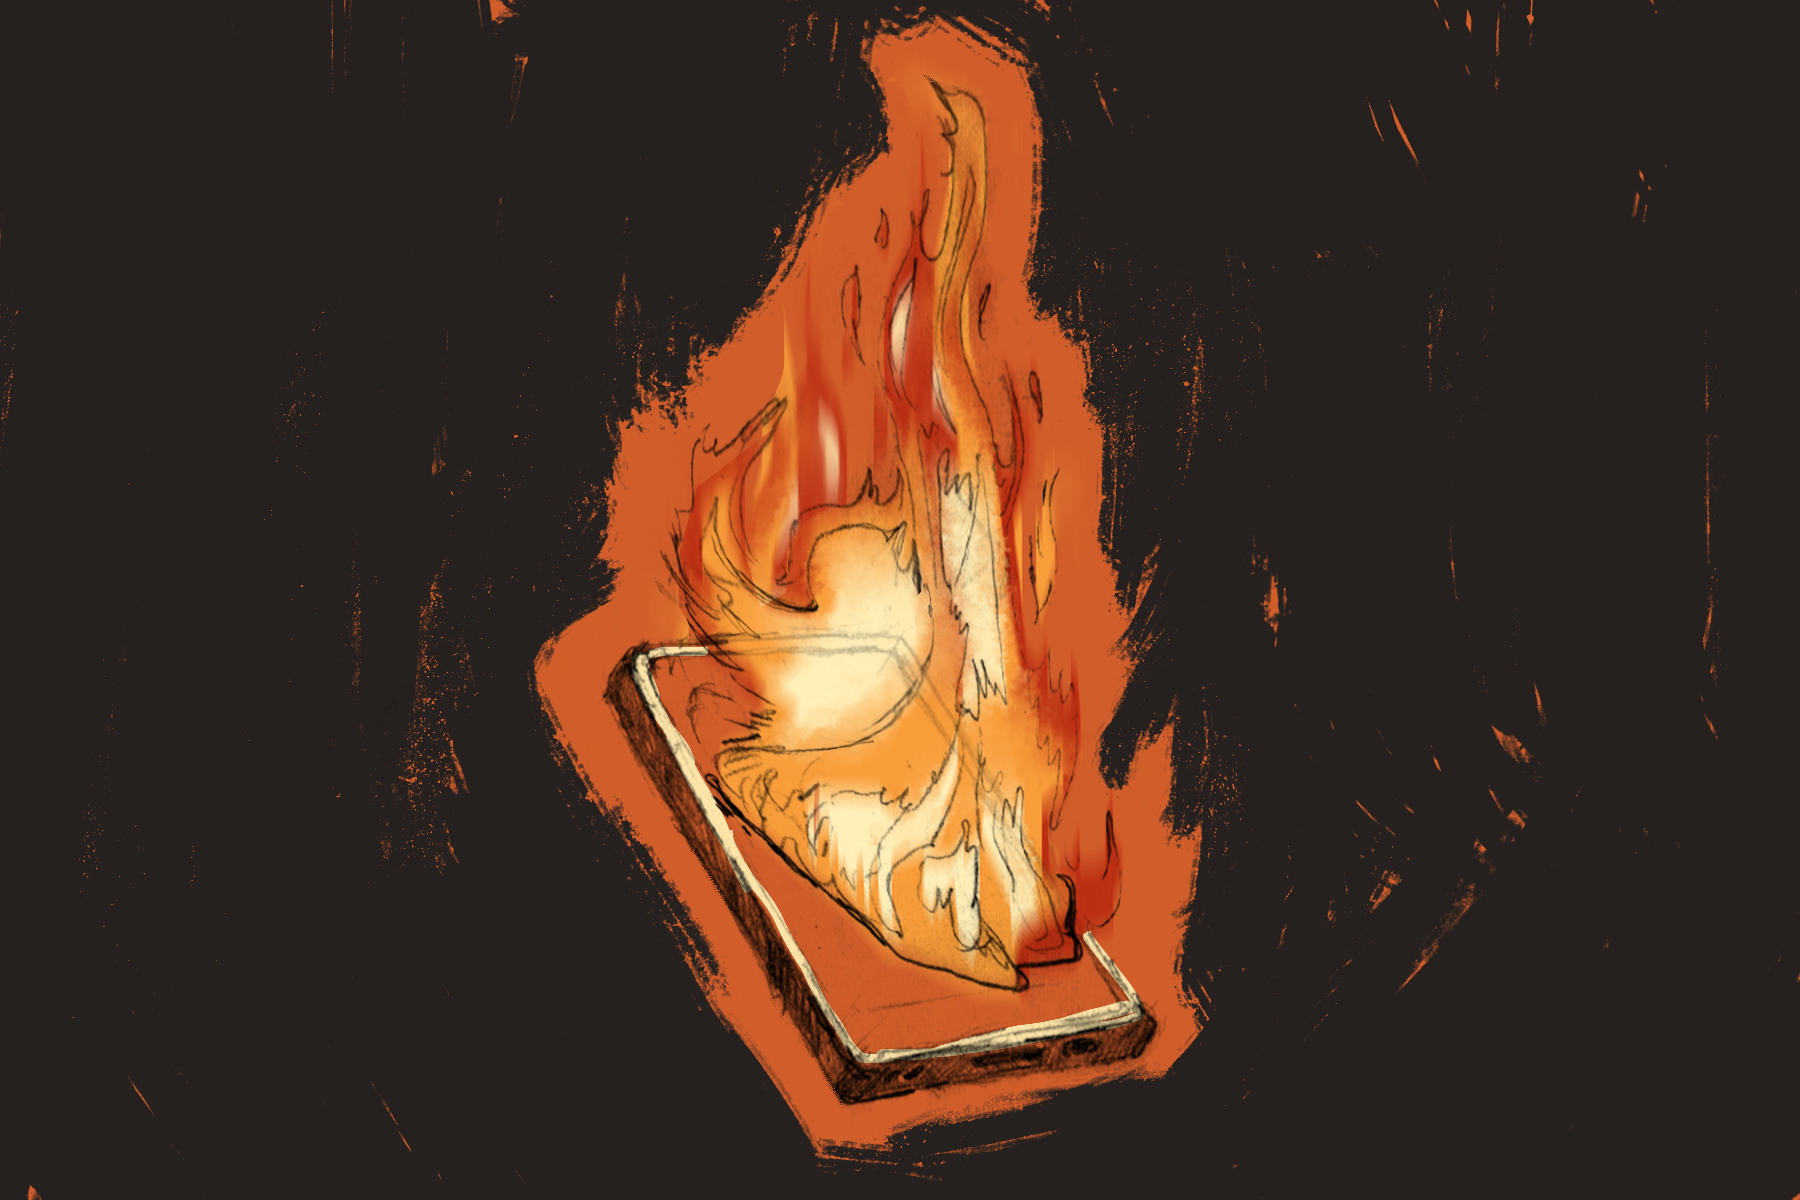 Illustration of a phone on fire, representing 'hot takes.'